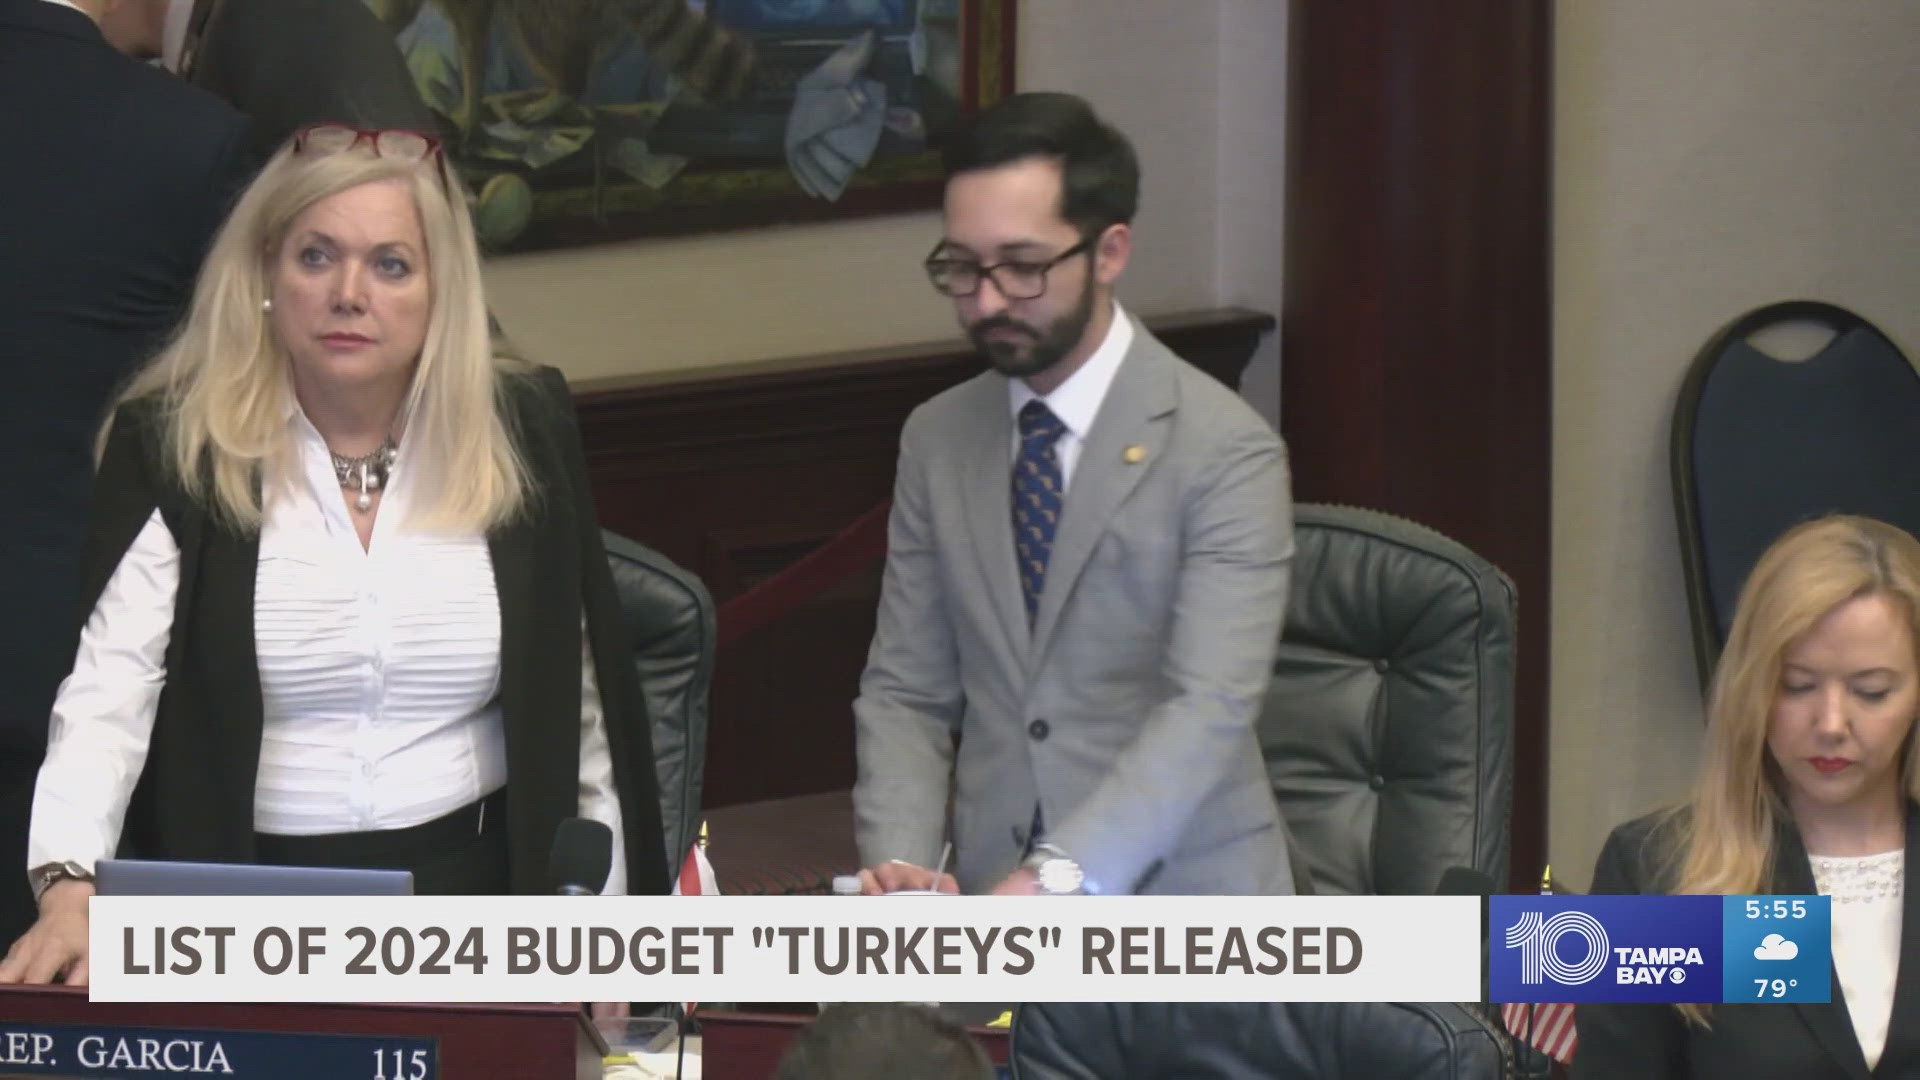 A tax watch group released a list of 450 so-called "turkeys" in the recently passed state budget.